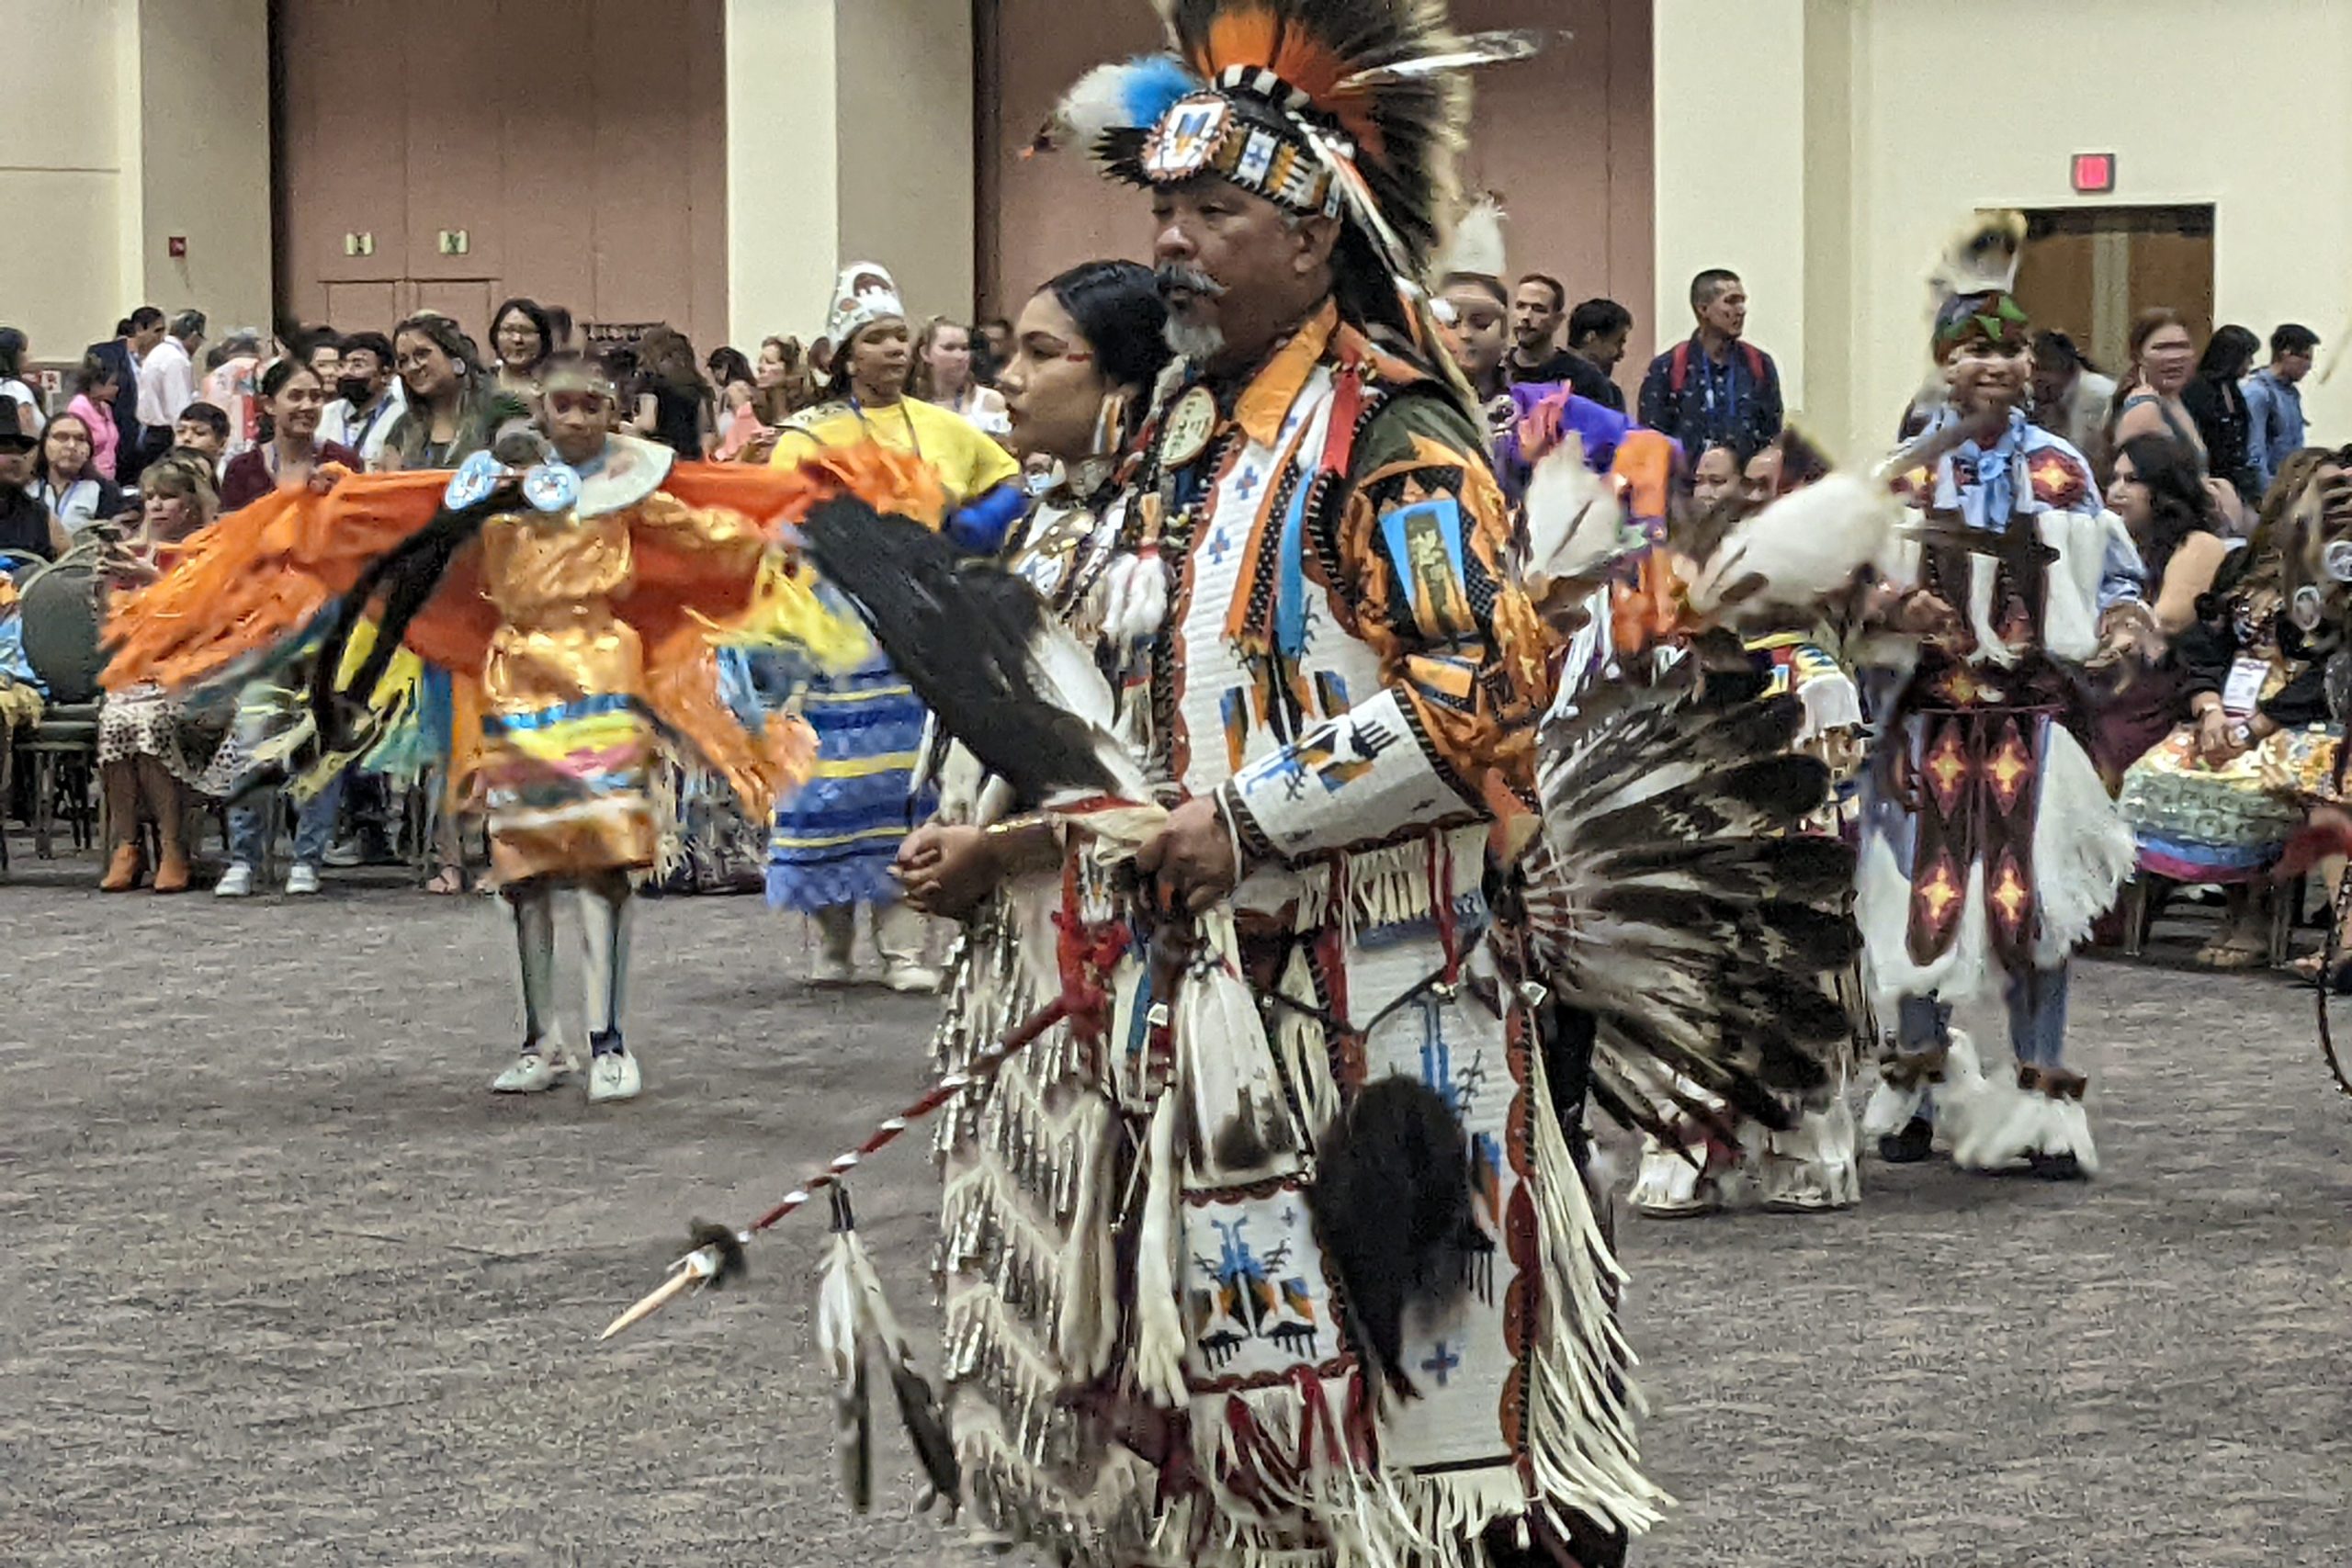 Dancers in traditional United States Native American dress.